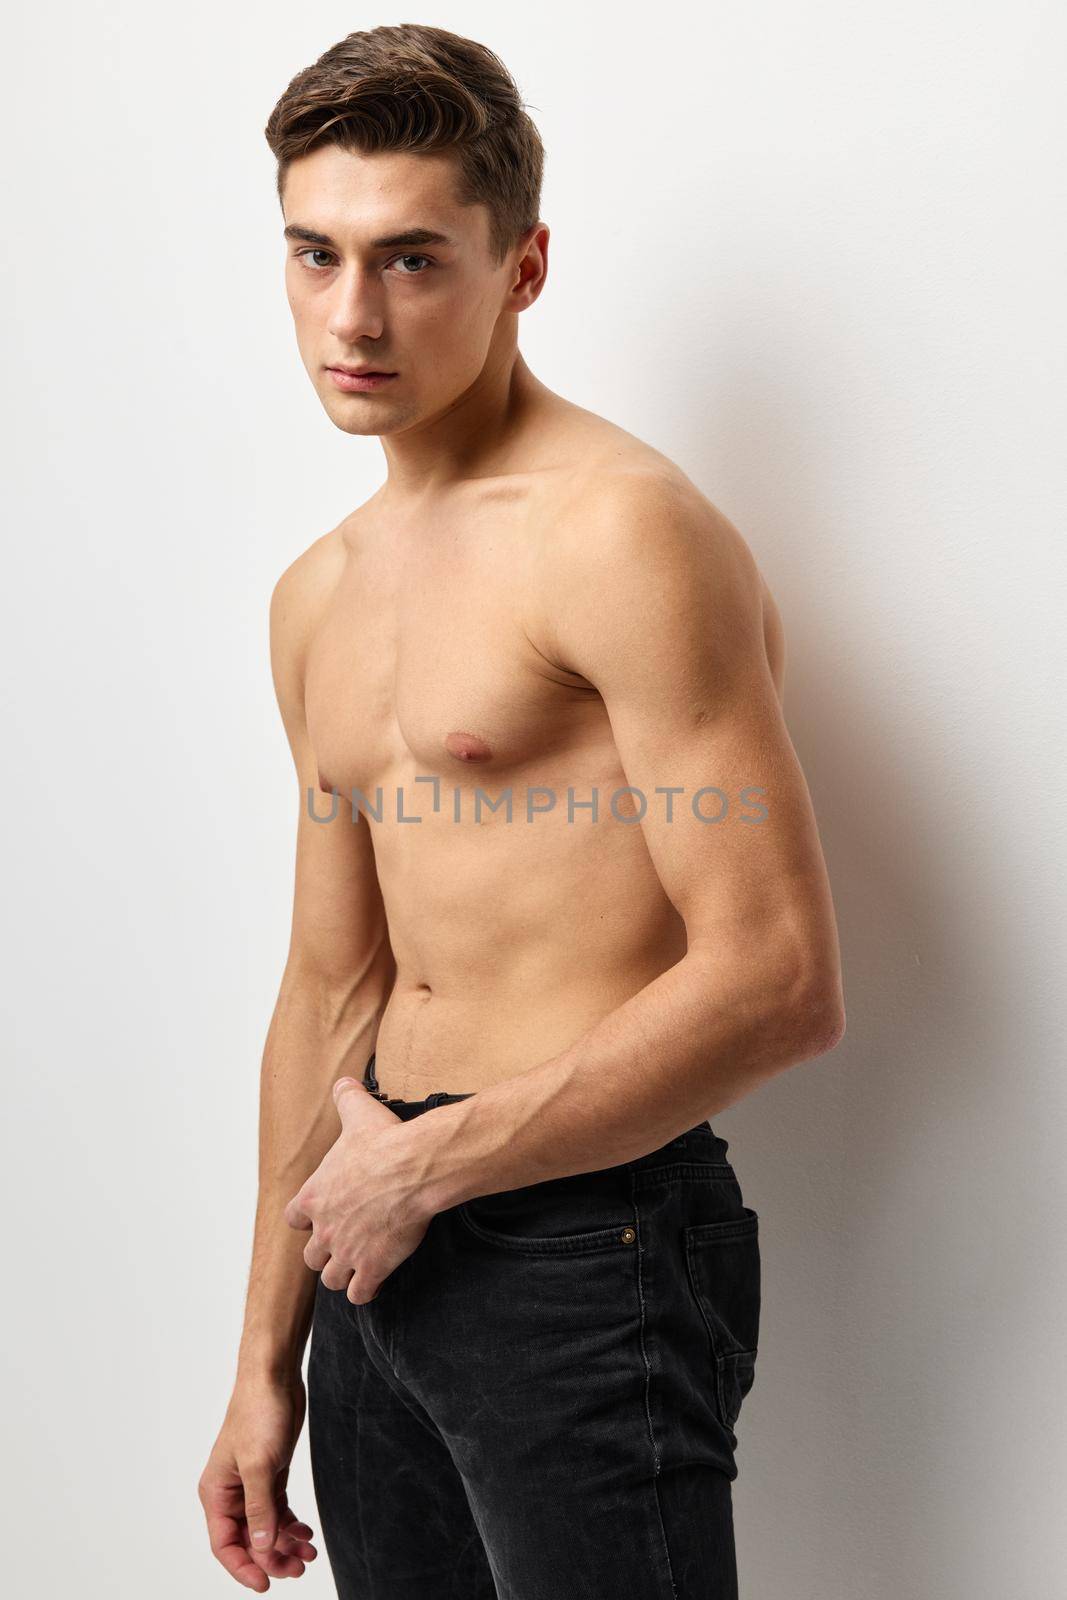 handsome man fashion hairstyle nude torso cropped view studio posing. High quality photo